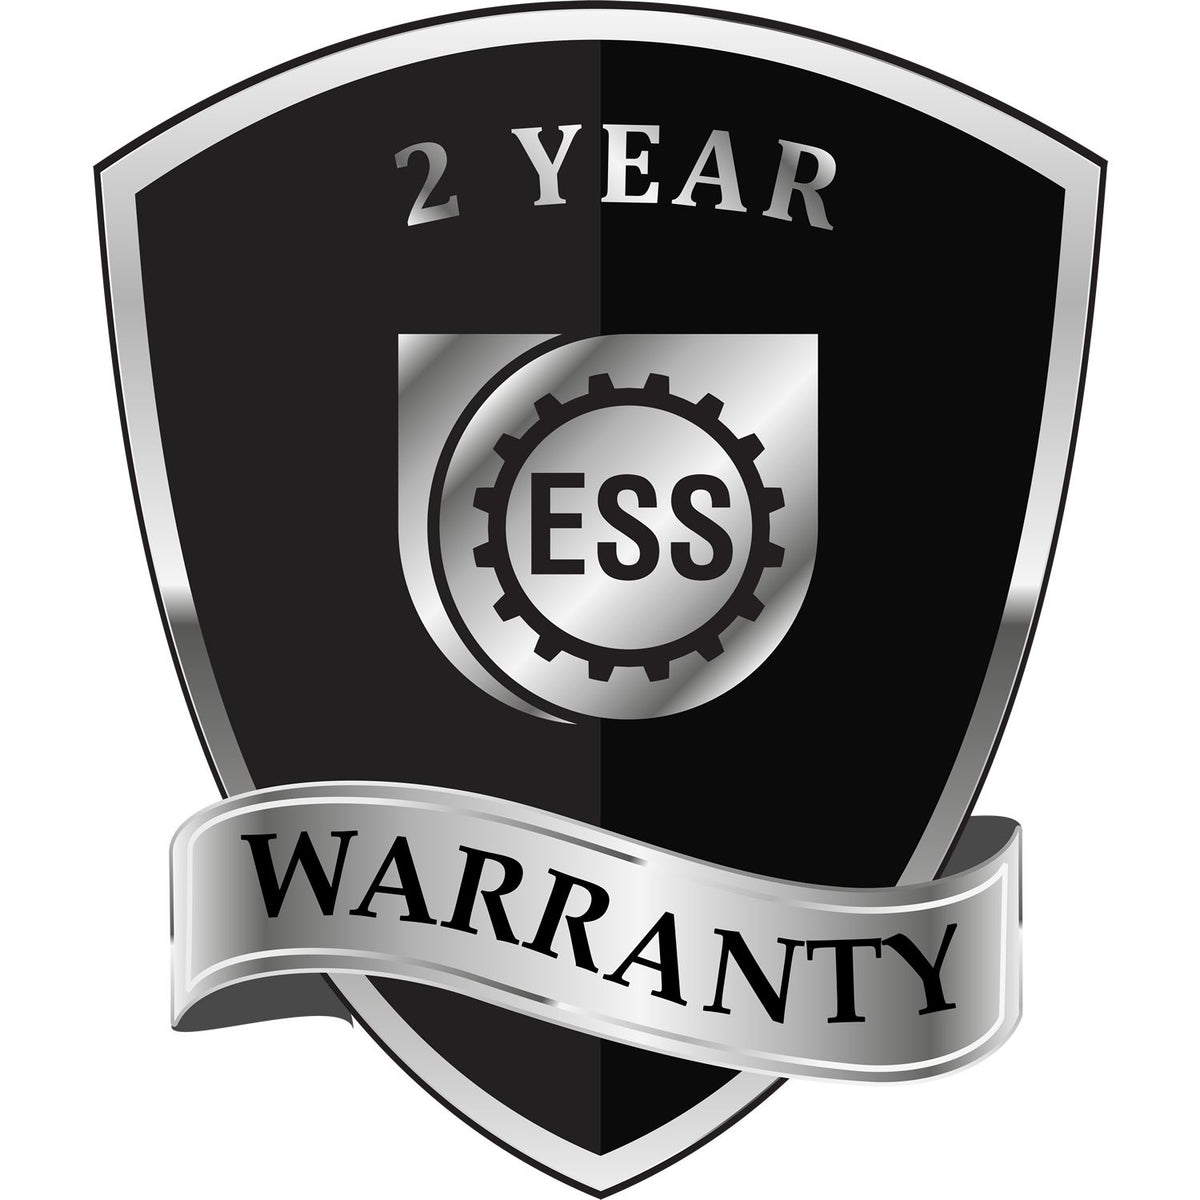 A black and silver badge or emblem showing warranty information for the Soft New Hampshire Professional Geologist Seal